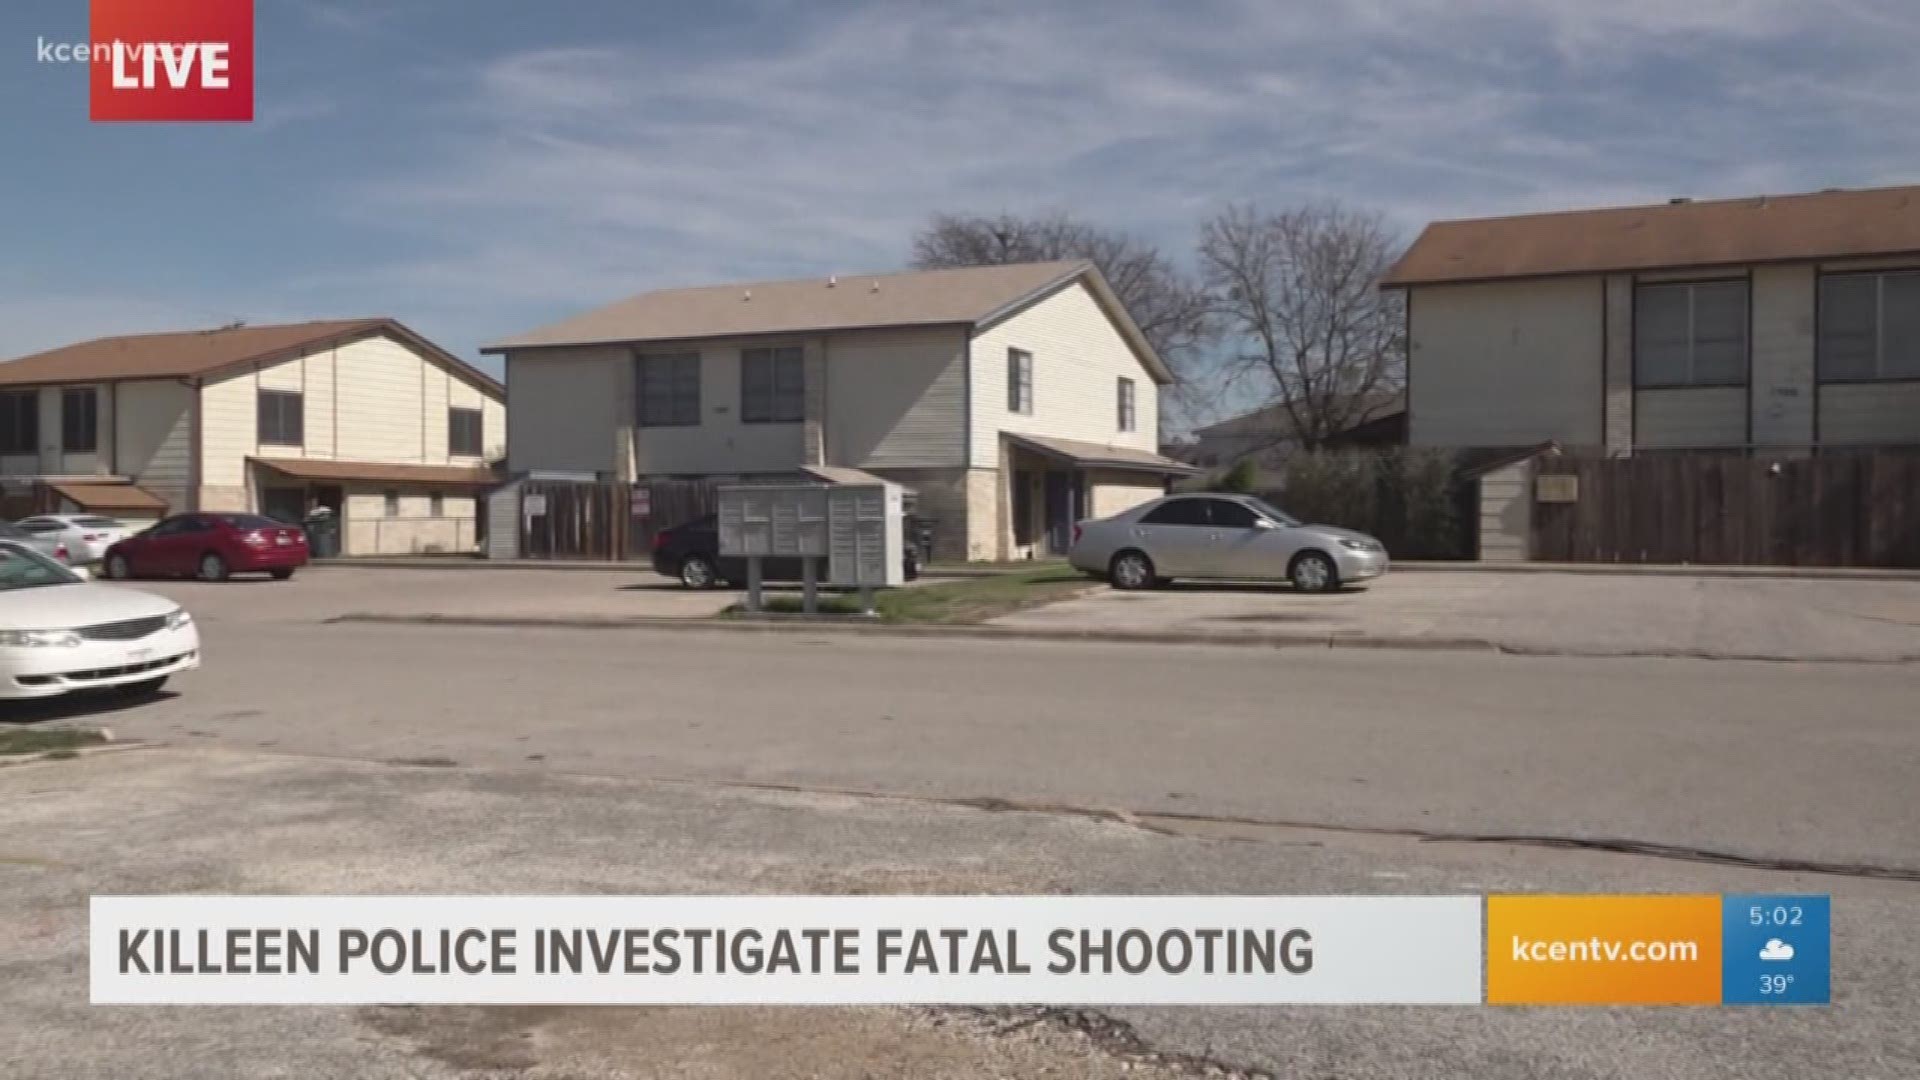 Maria Aguilera reports. https://www.kcentv.com/article/news/local/17-year-old-shot-and-killed-in-killeen-police-homicide-unit-investigating/500-401aef21-e159-4734-a401-6b173c6598aa